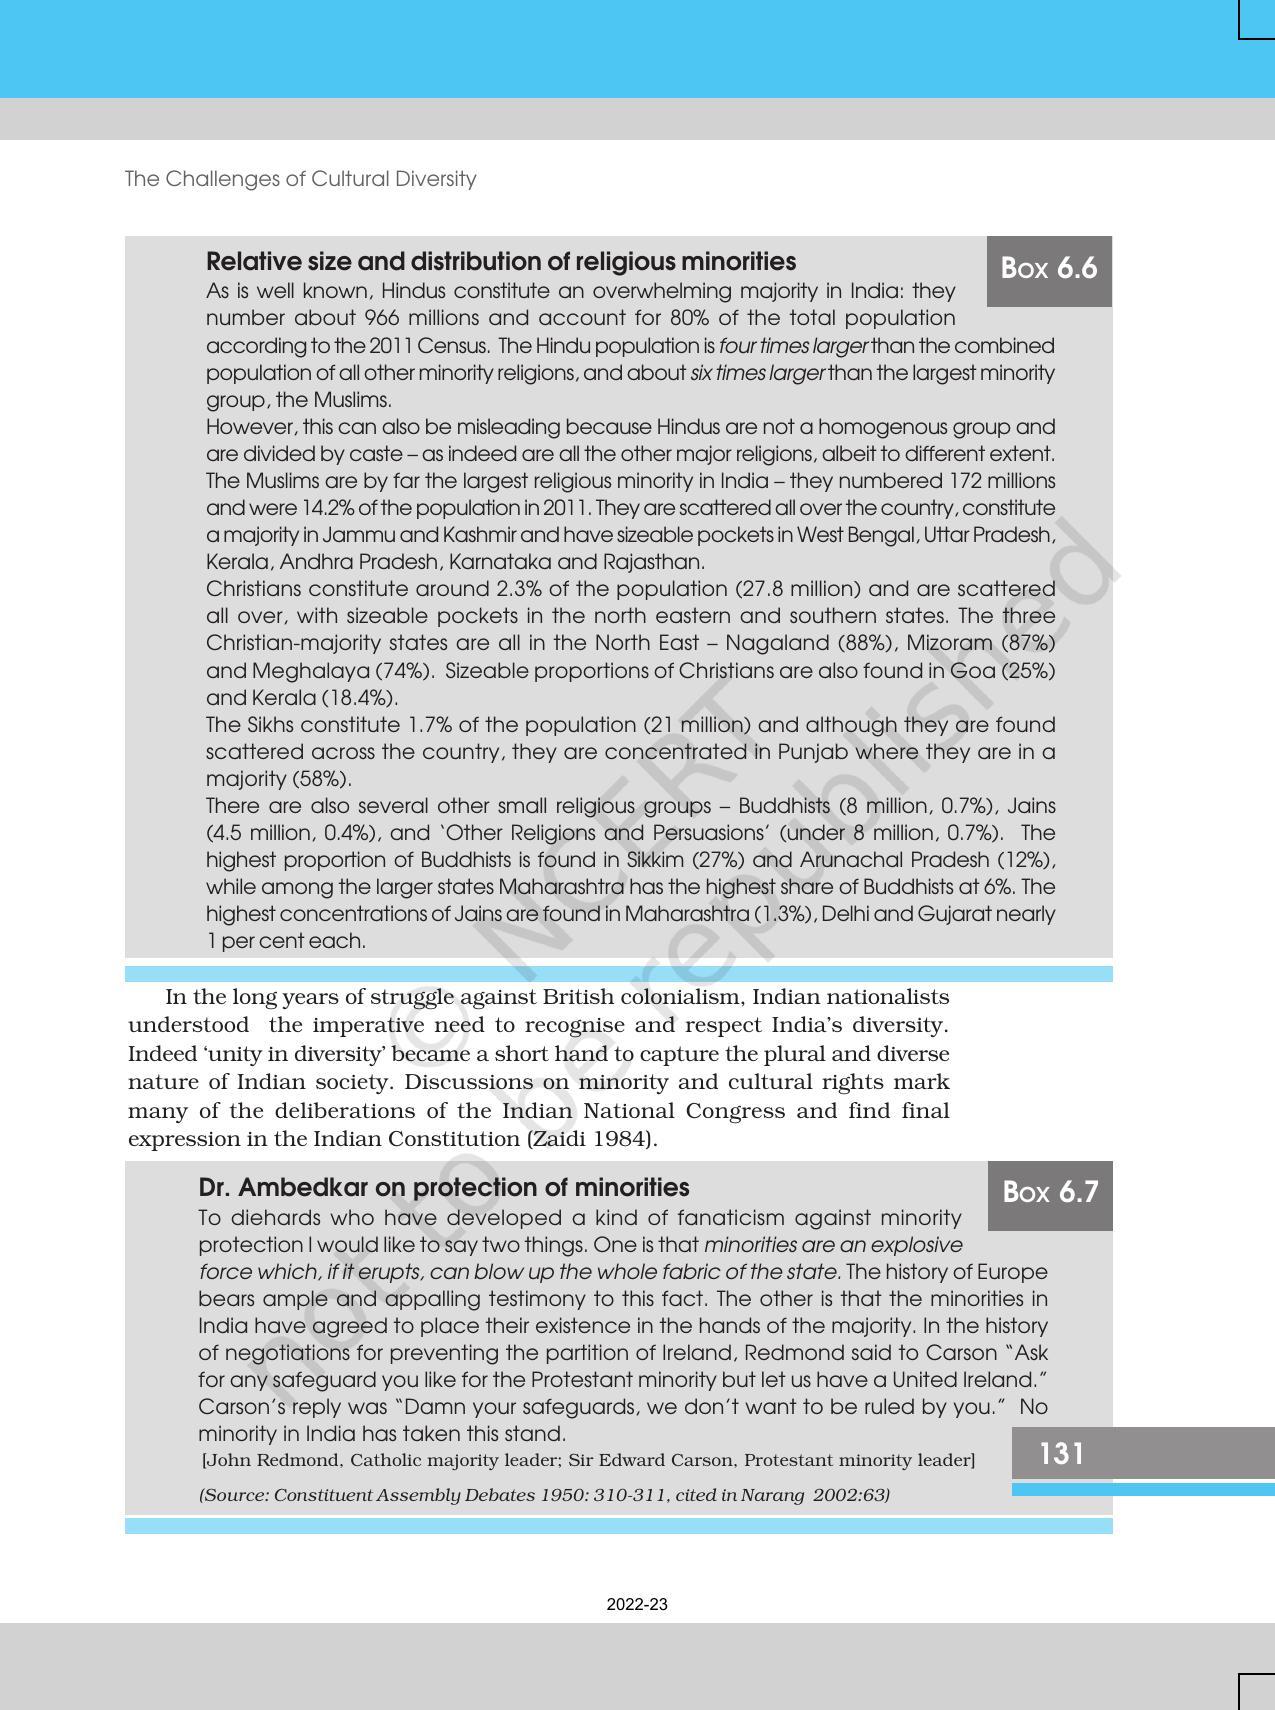 NCERT Book for Class 12 Sociology (Indian Society) Chapter 6 The Challenges of Cultural Diversity - Page 19